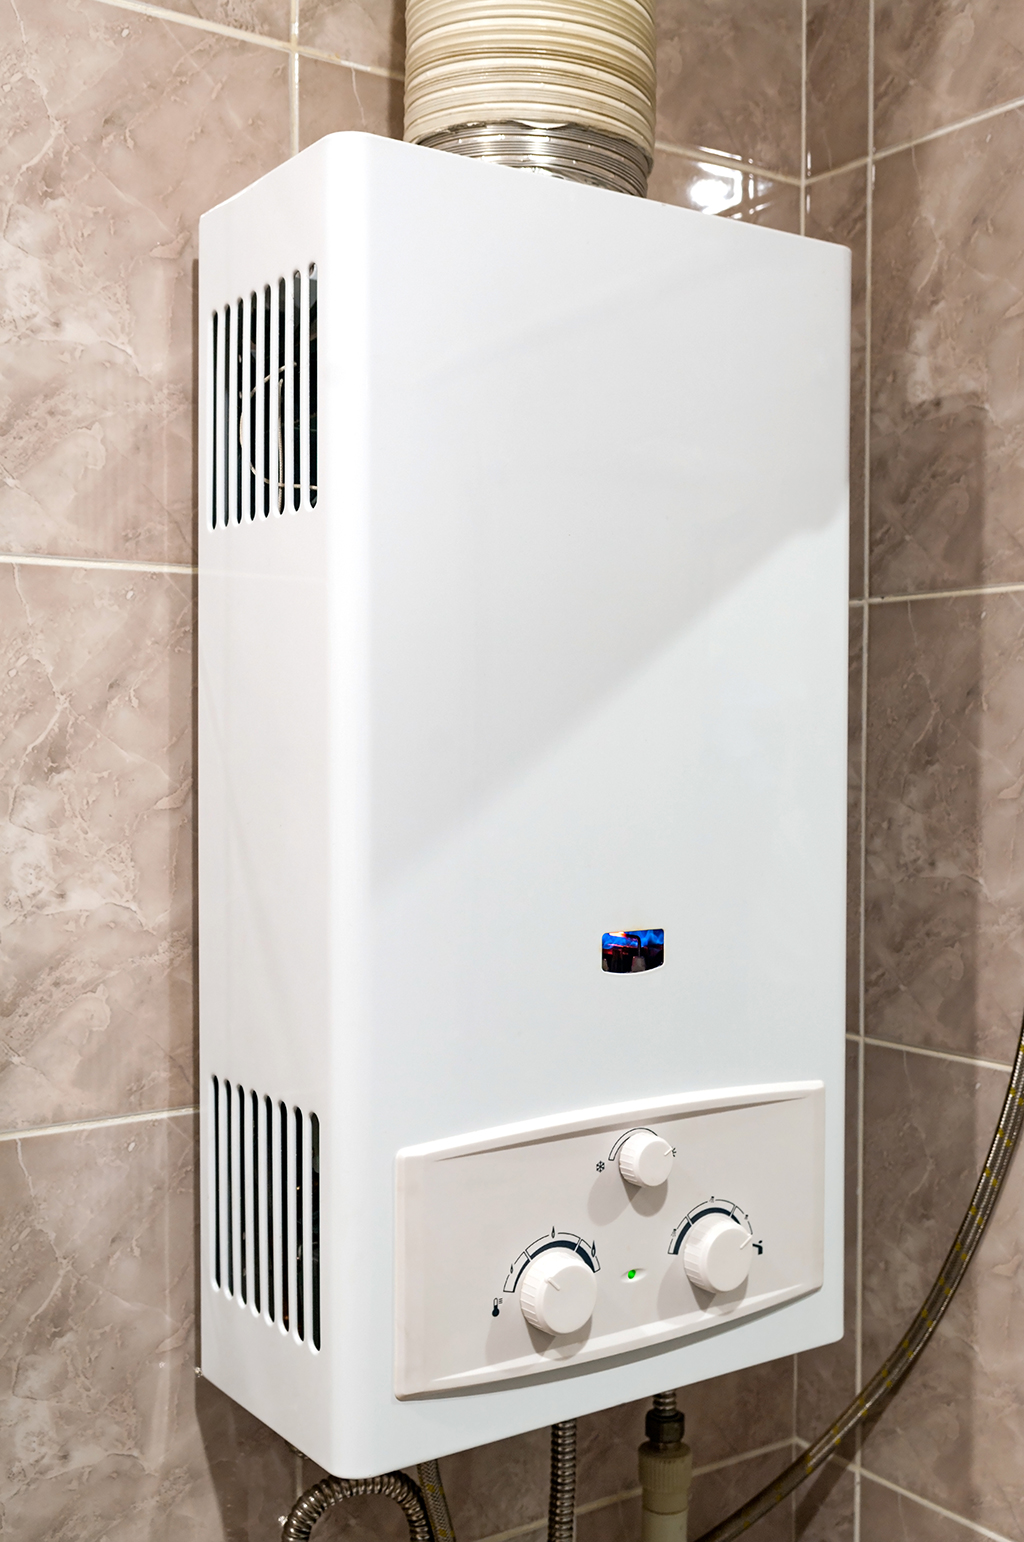 The Benefits Of Investing In Tankless Water Heaters | Marrero, LA